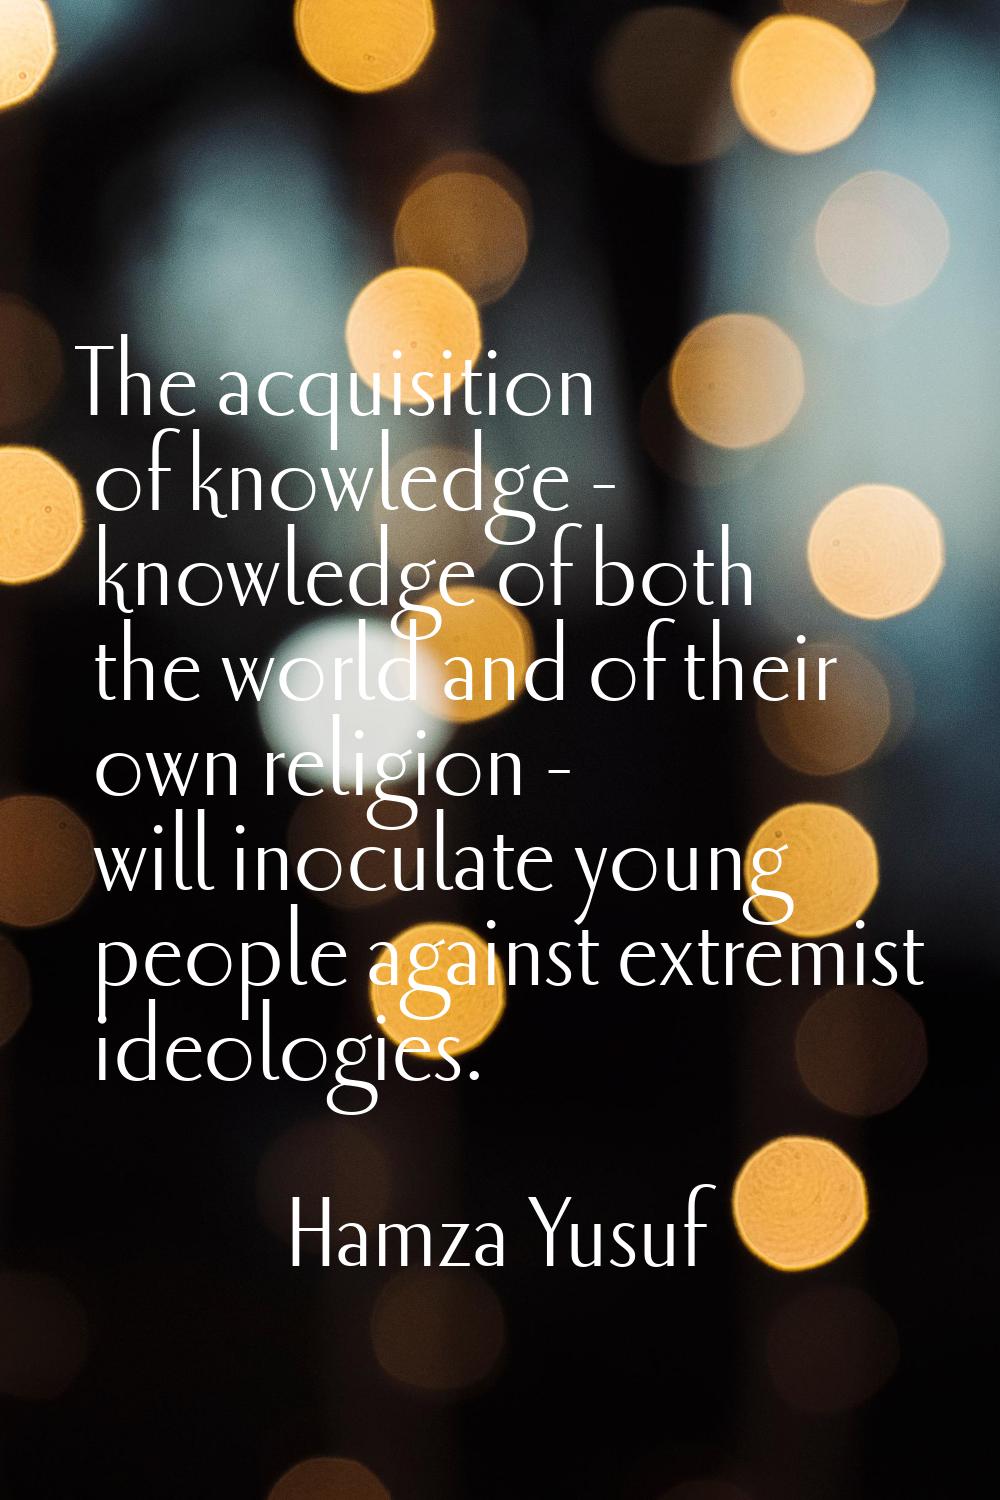 The acquisition of knowledge - knowledge of both the world and of their own religion - will inocula